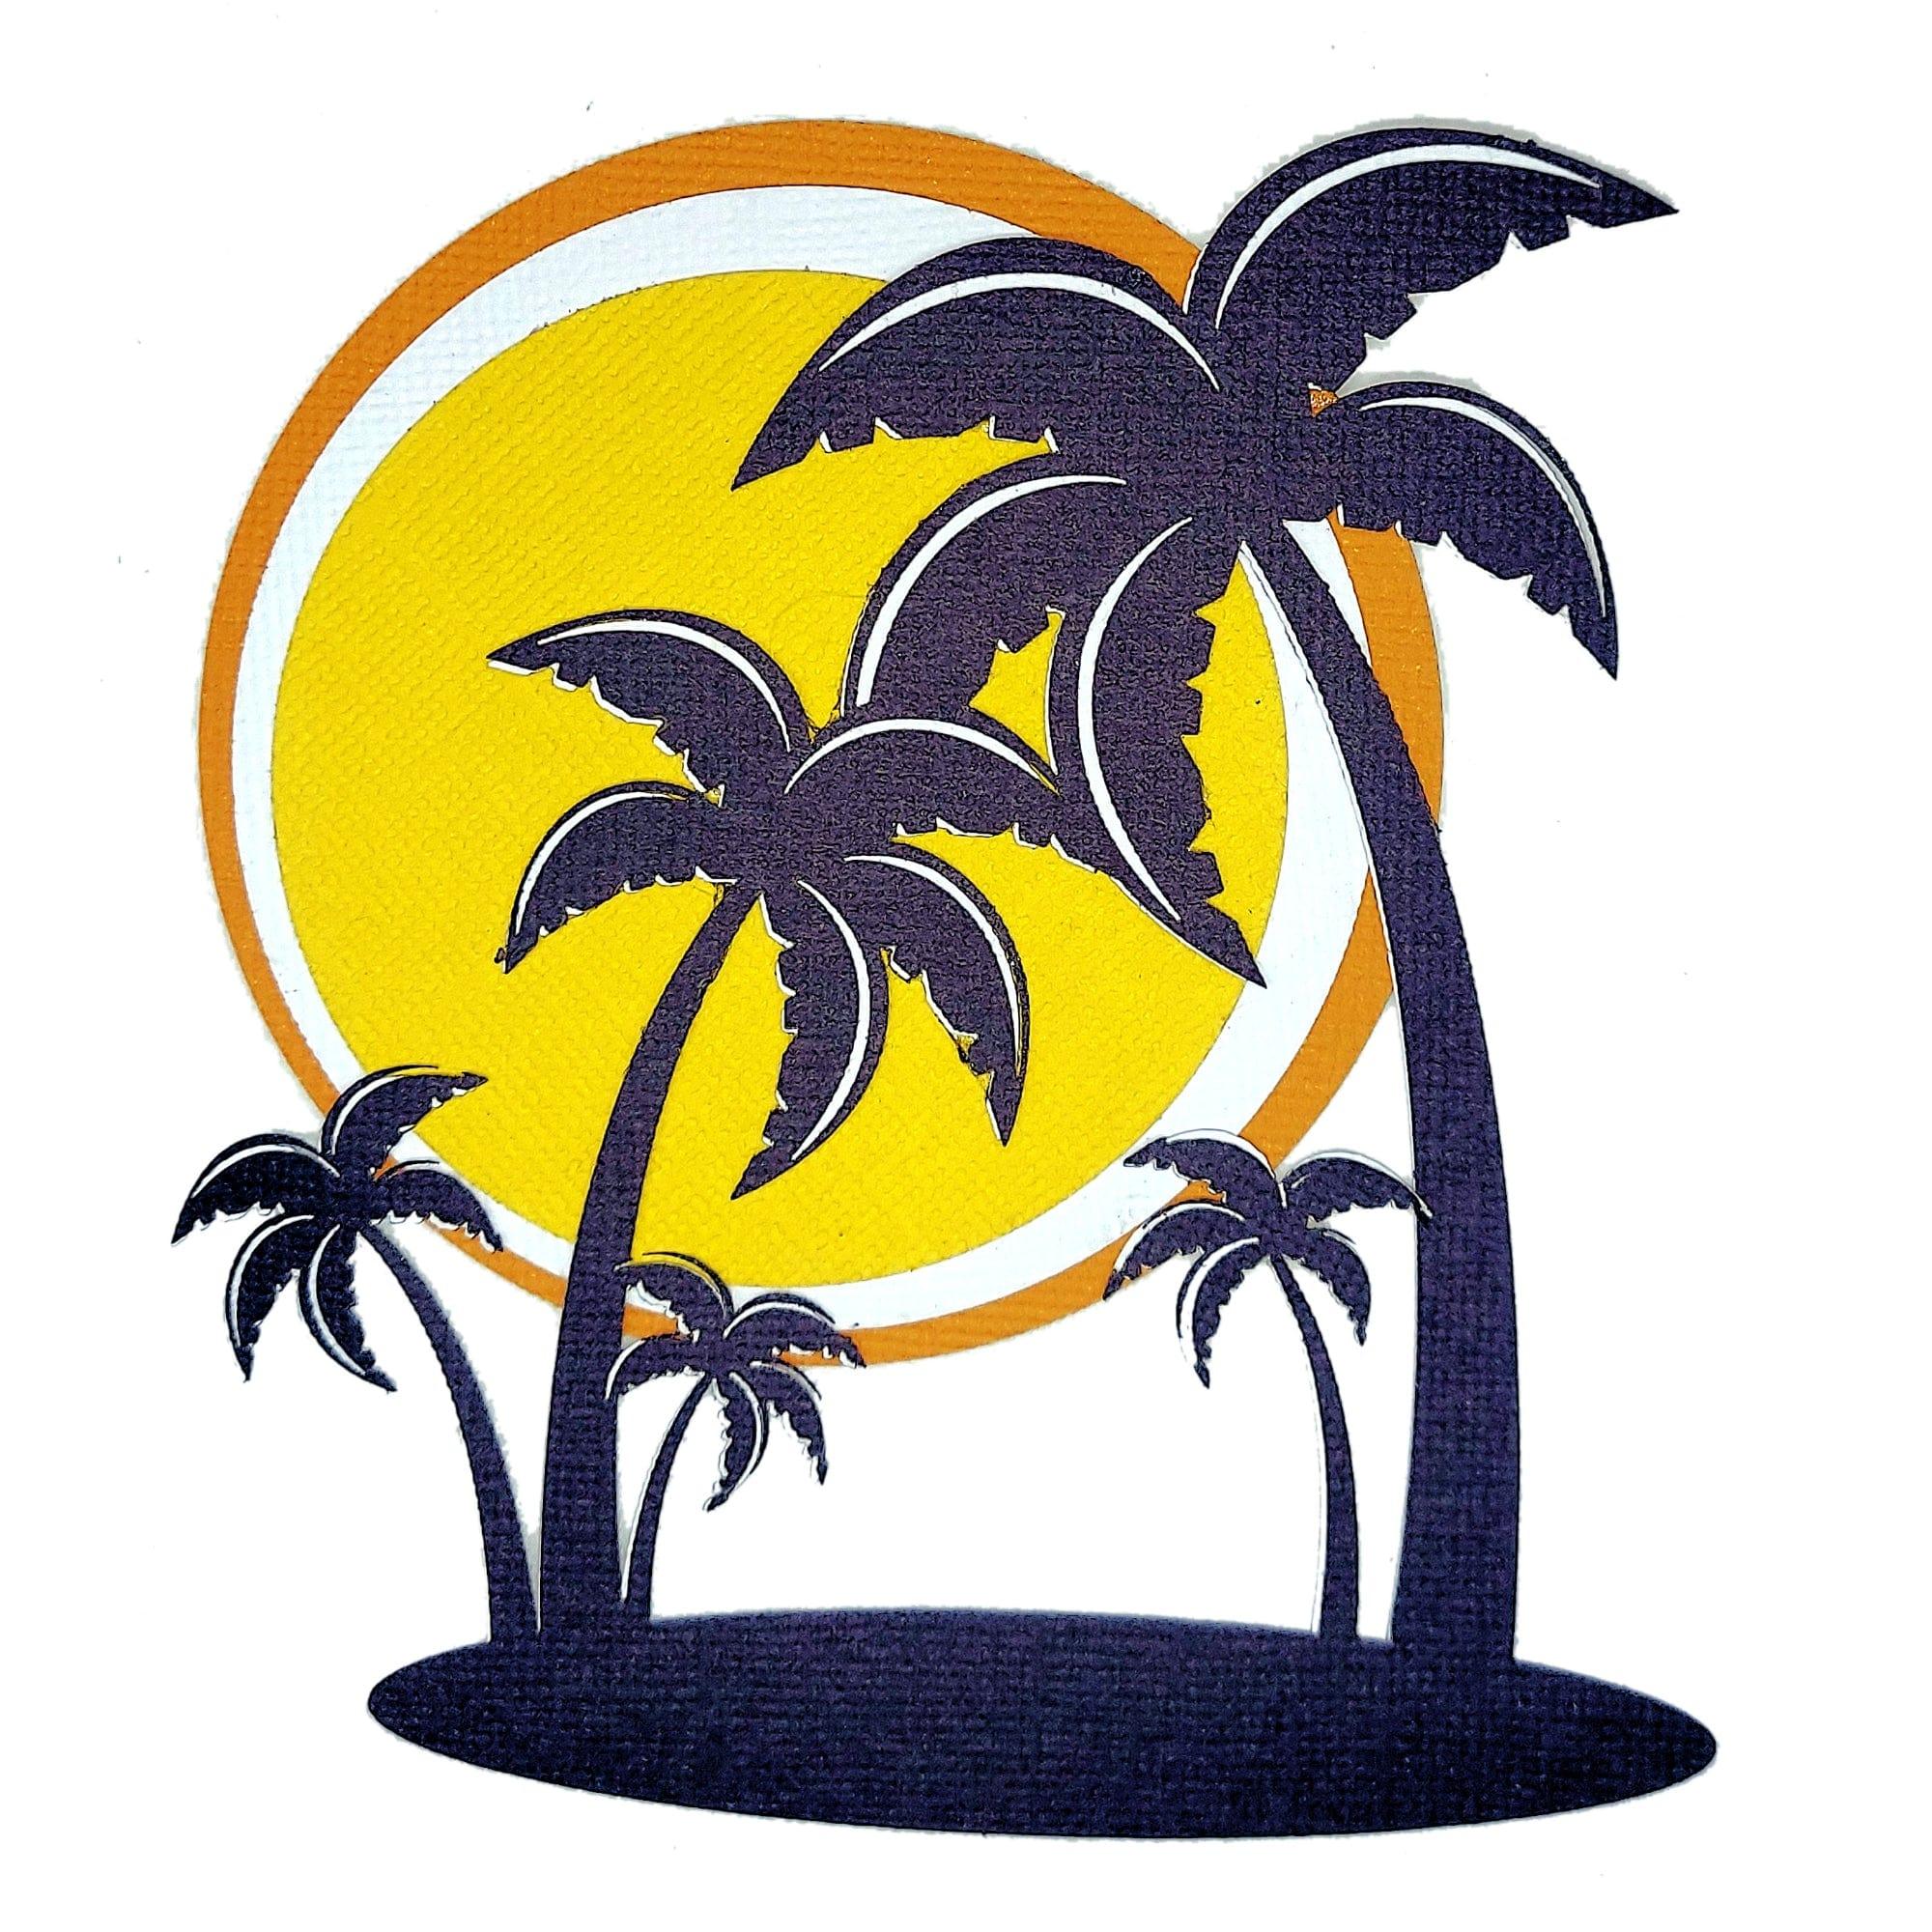 Palm Tree Silhouette Fully-Assembled 5 X 5 Laser Cut Scrapbook Embellishment by SSC Laser Designs